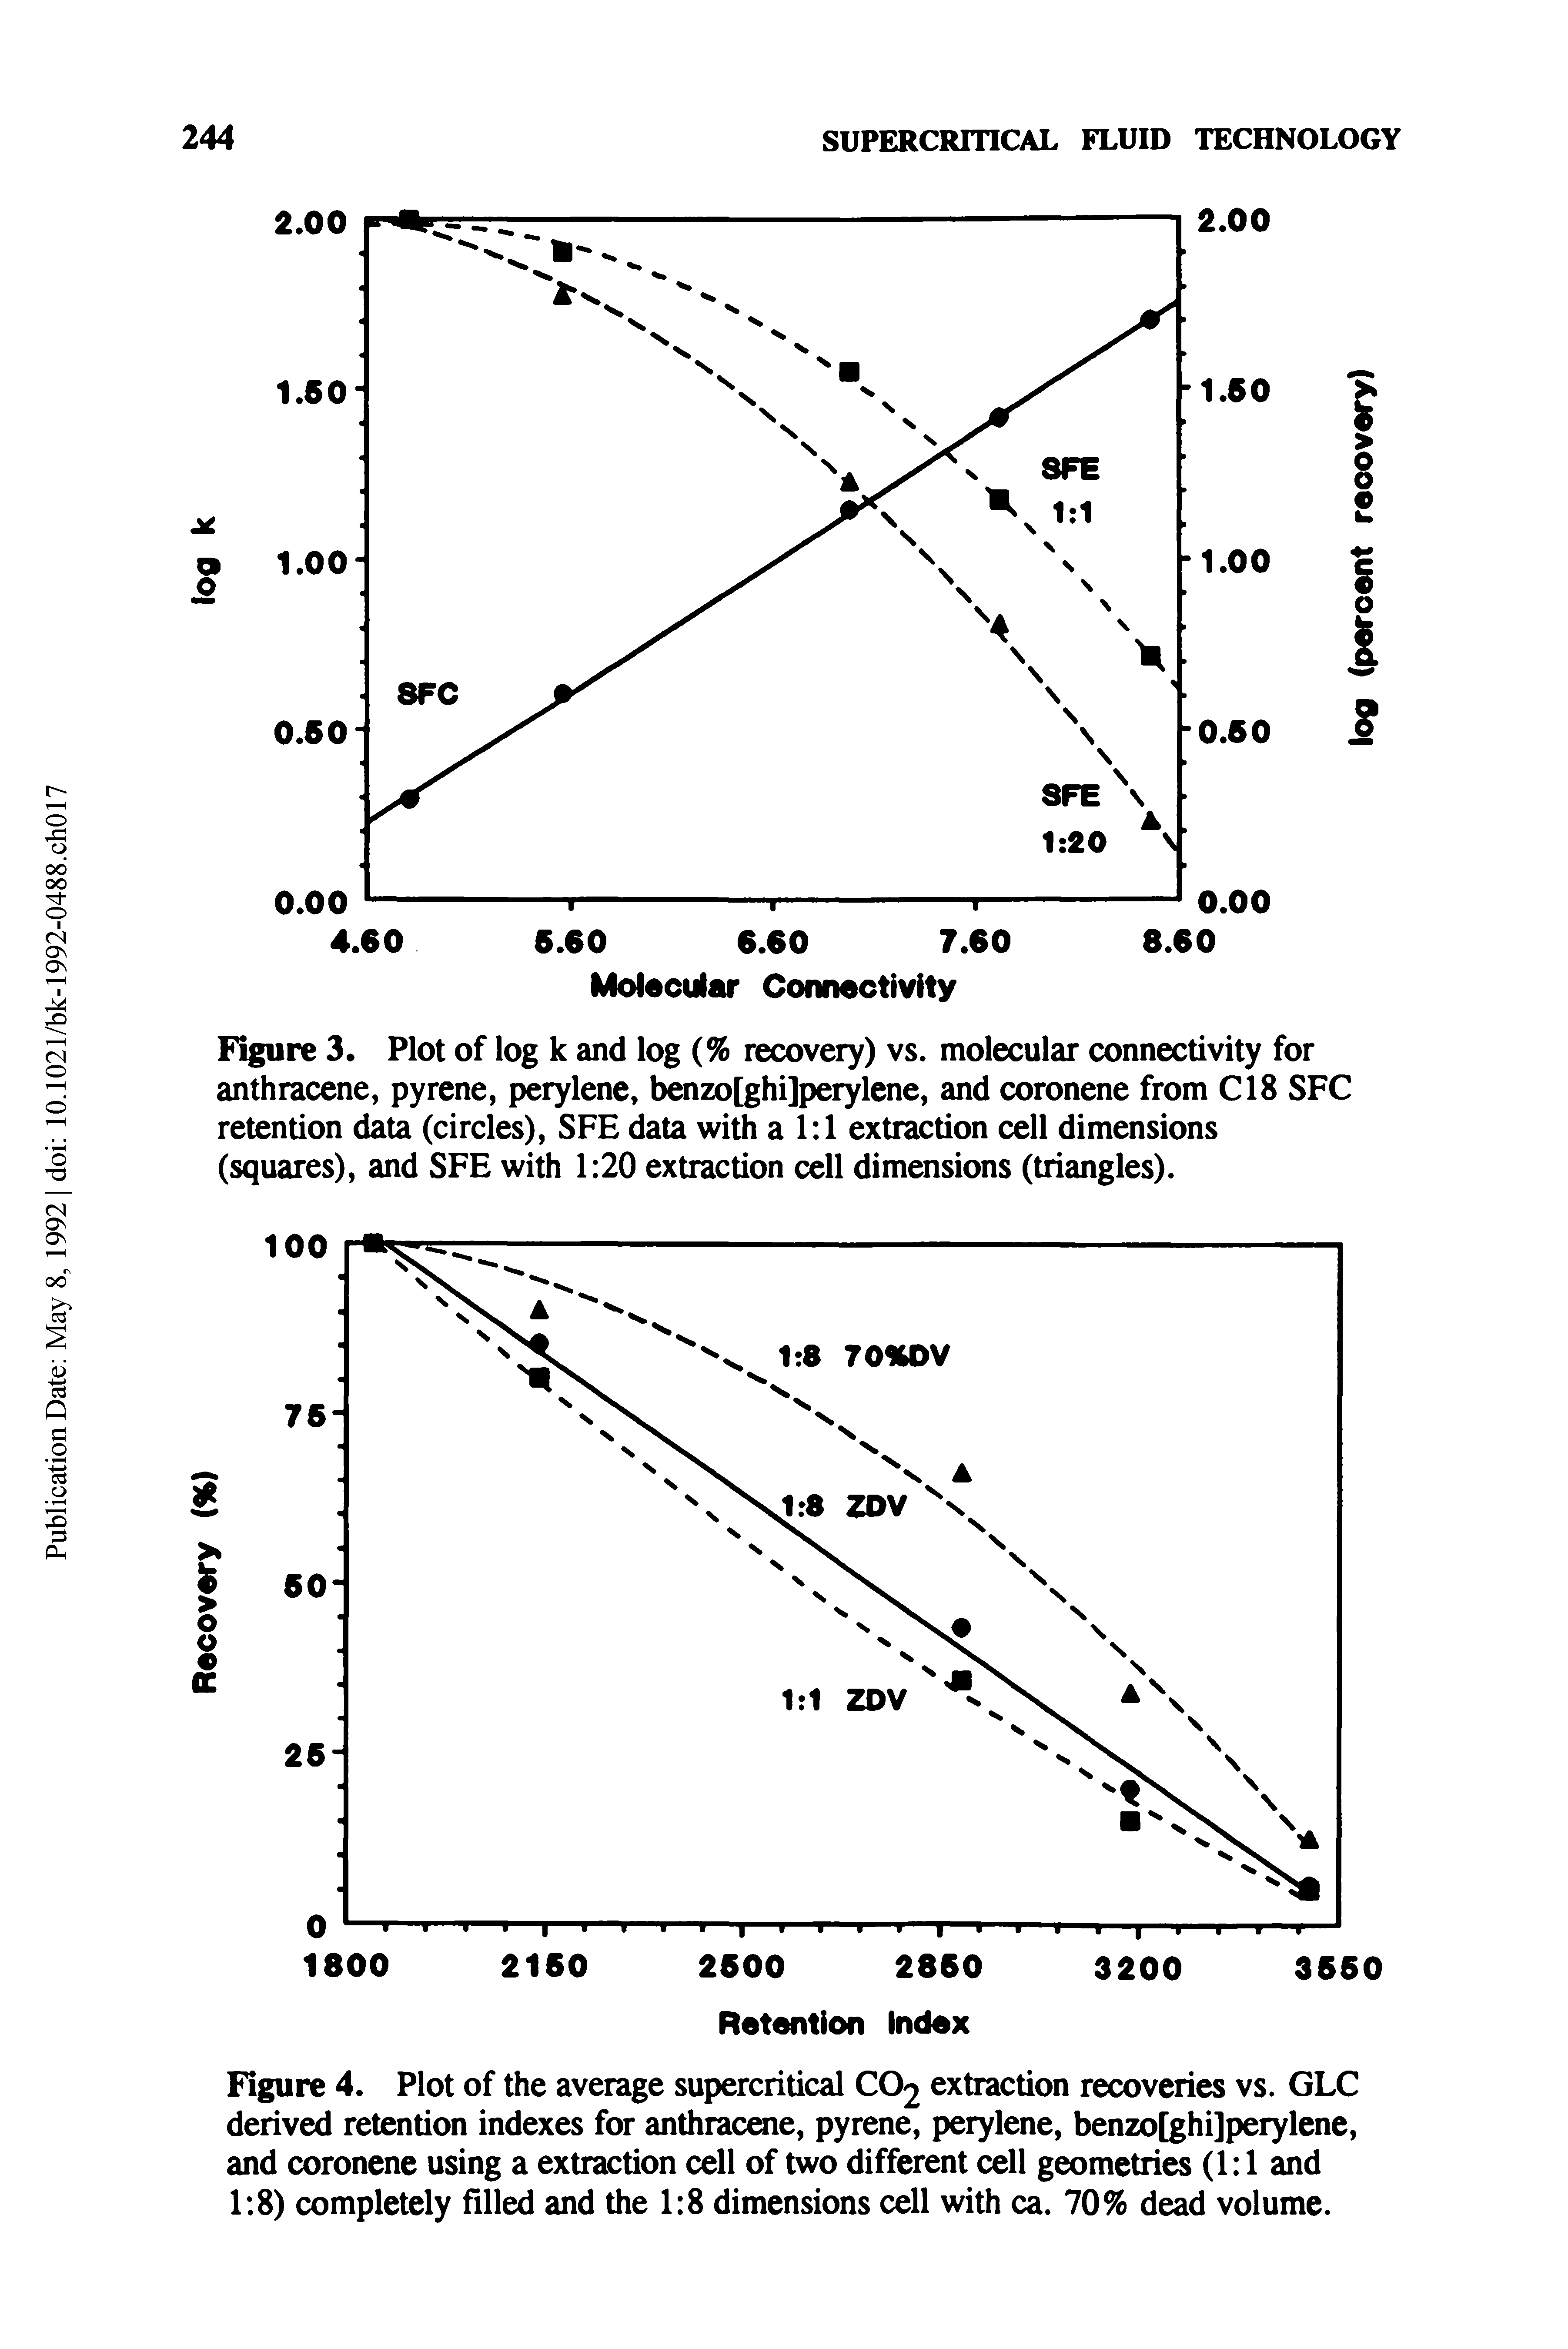 Figure 4. Plot of the average supercritical CC>2 extraction recoveries vs. GLC derived retention indexes for anthracene, pyrene, perylene, benzo[ghi]perylene, and coronene using a extraction cell of two different cell geometries (1 1 and 1 8) completely filled and the 1 8 dimensions cell with ca. 70% dead volume.